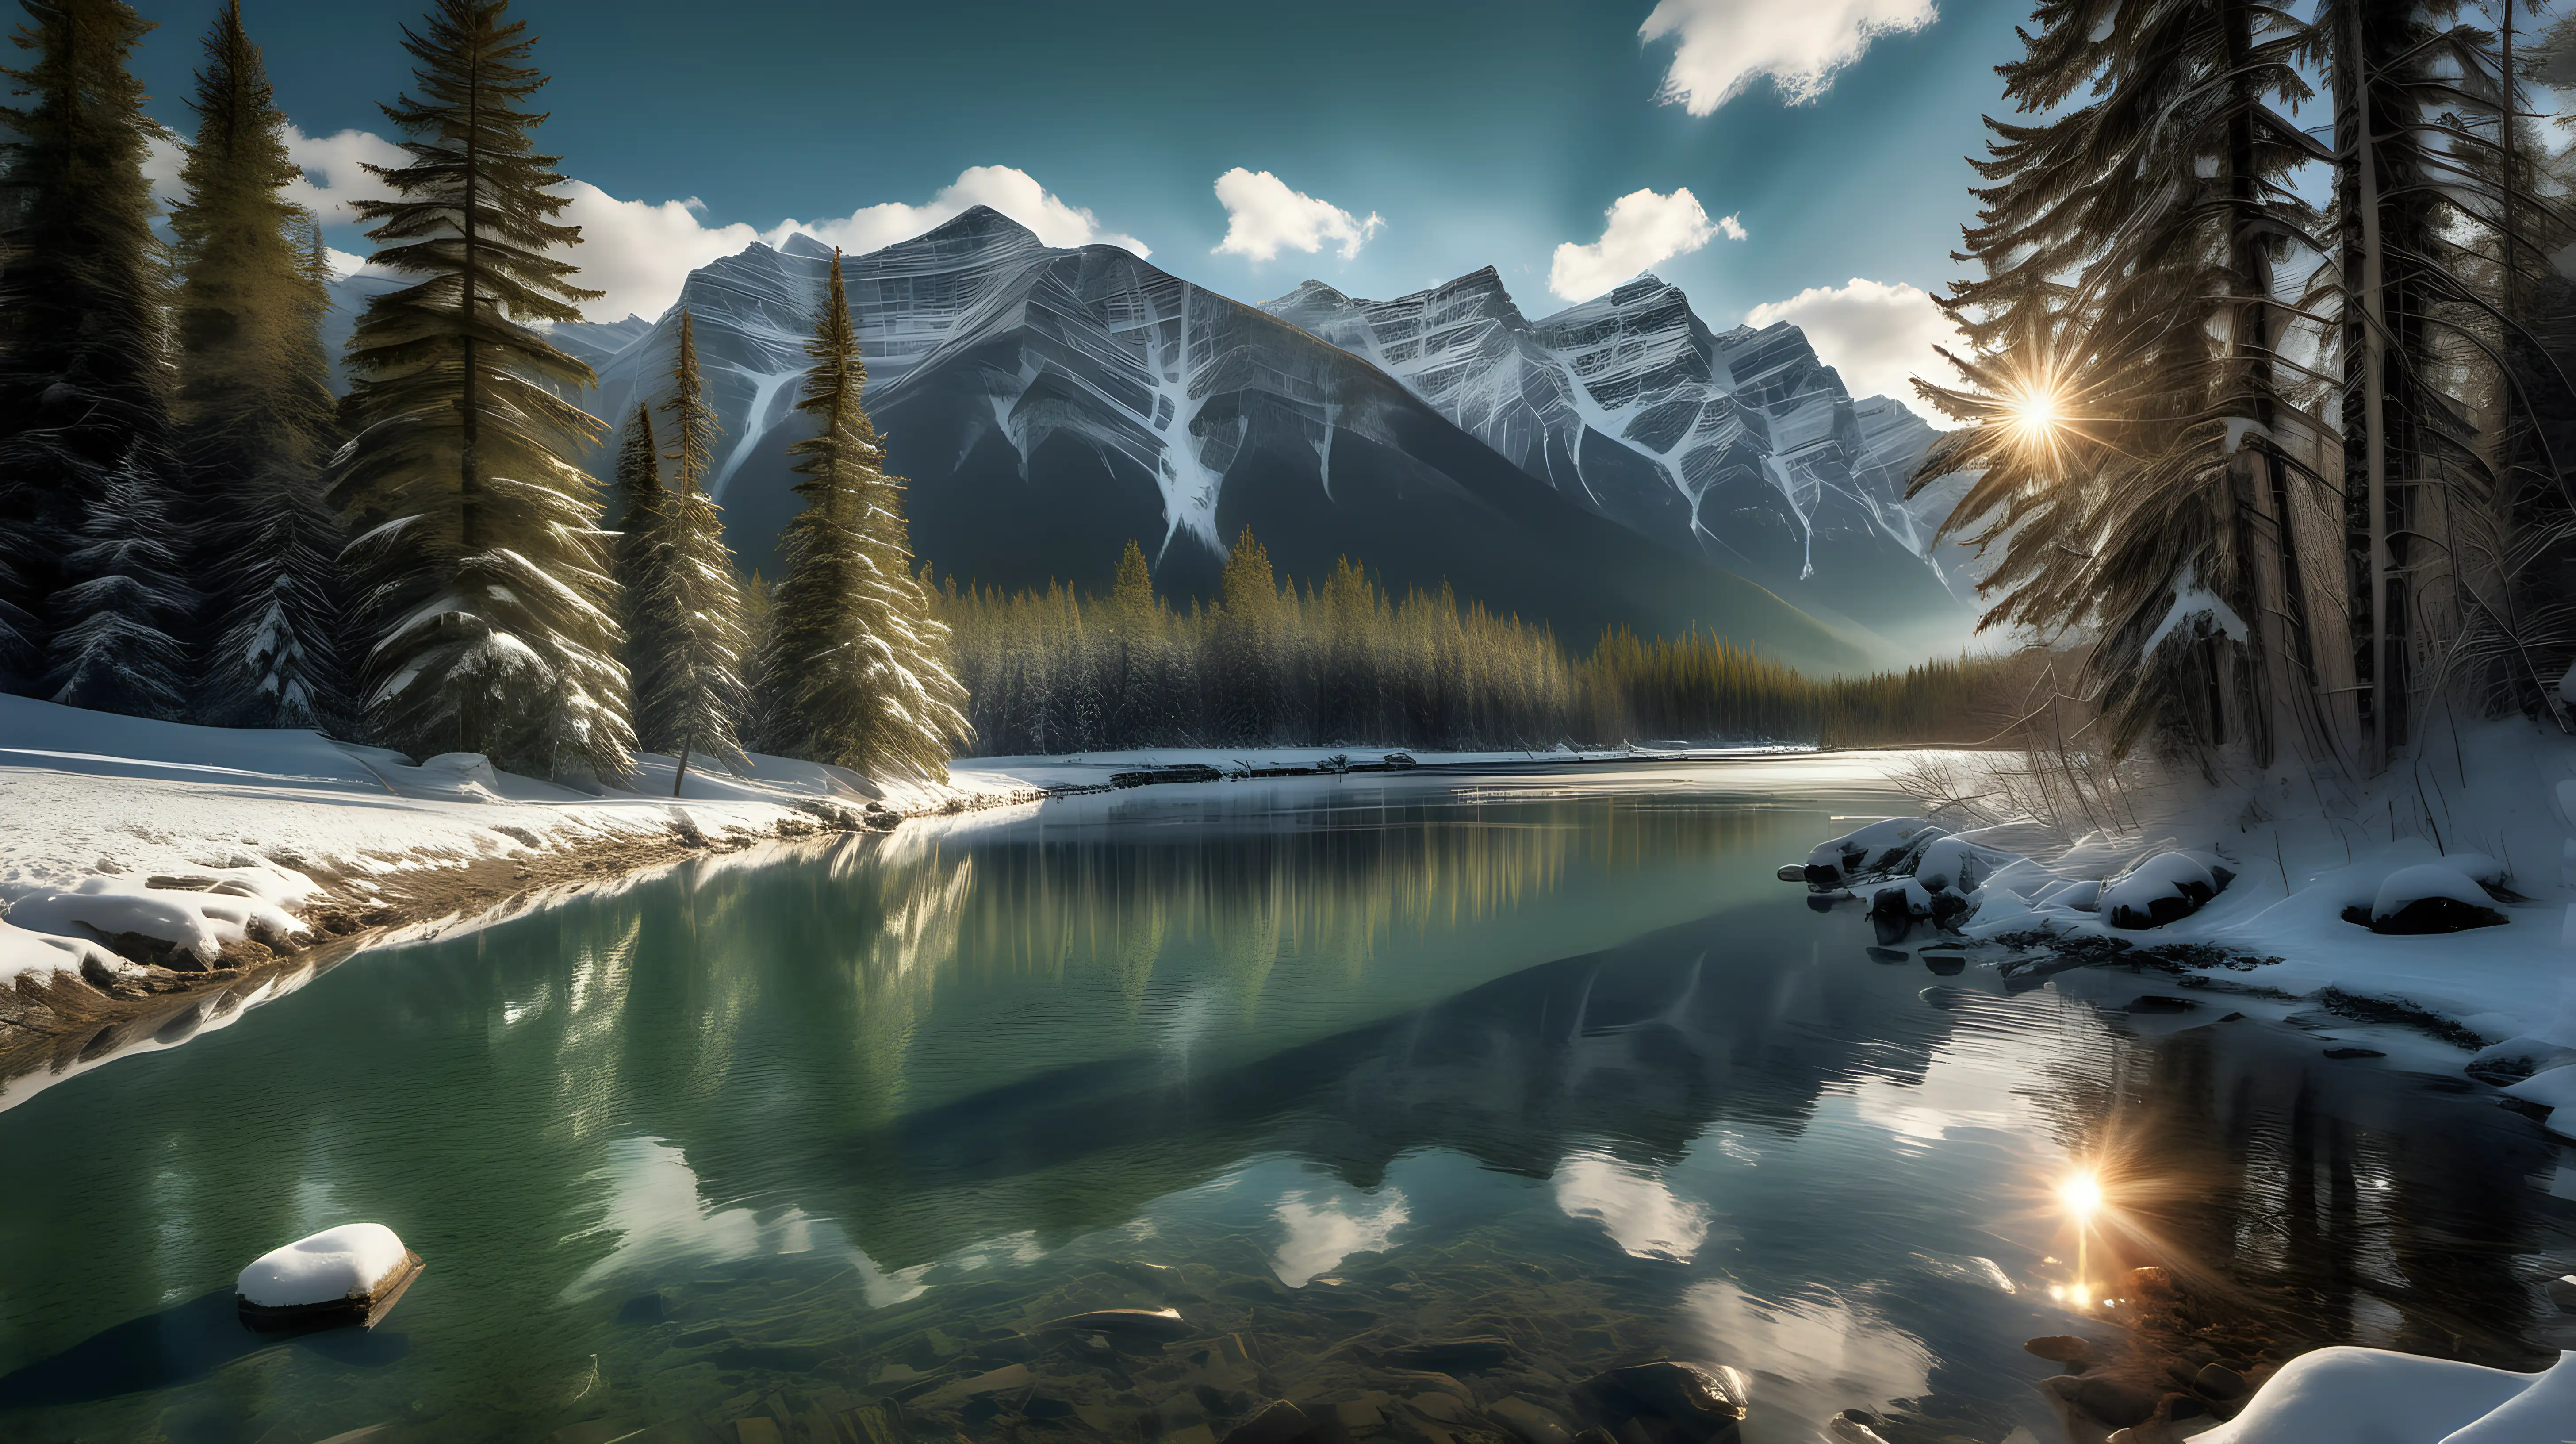 Majestic Banff National Park SnowCapped Mountains and Crystal River Oasis